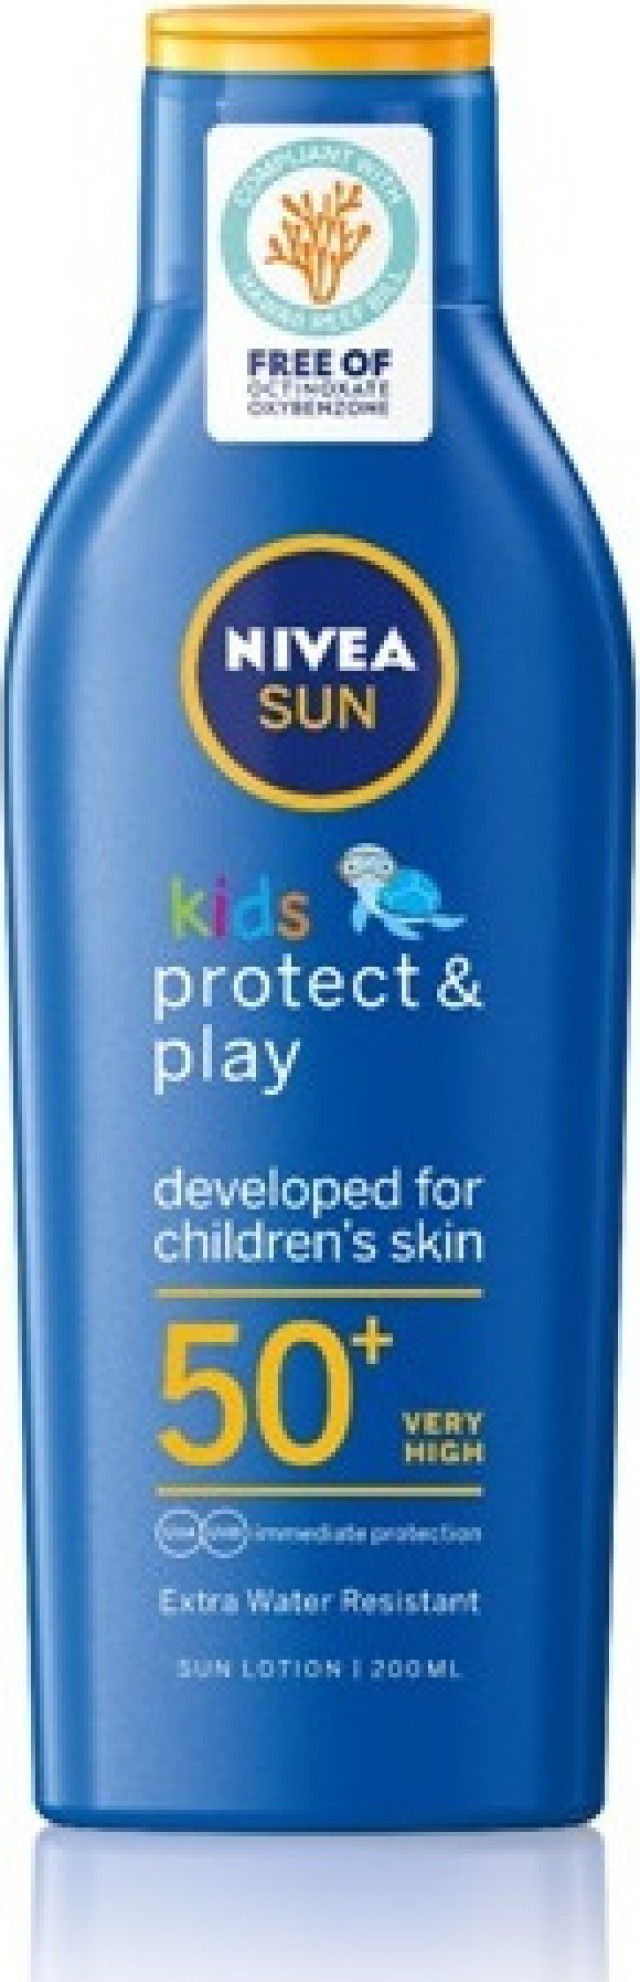 Nivea Sun Kids Protect & Play Lotion SPF50+ Παιδικό Αντηλιακό Γαλάκτωμα 200ml